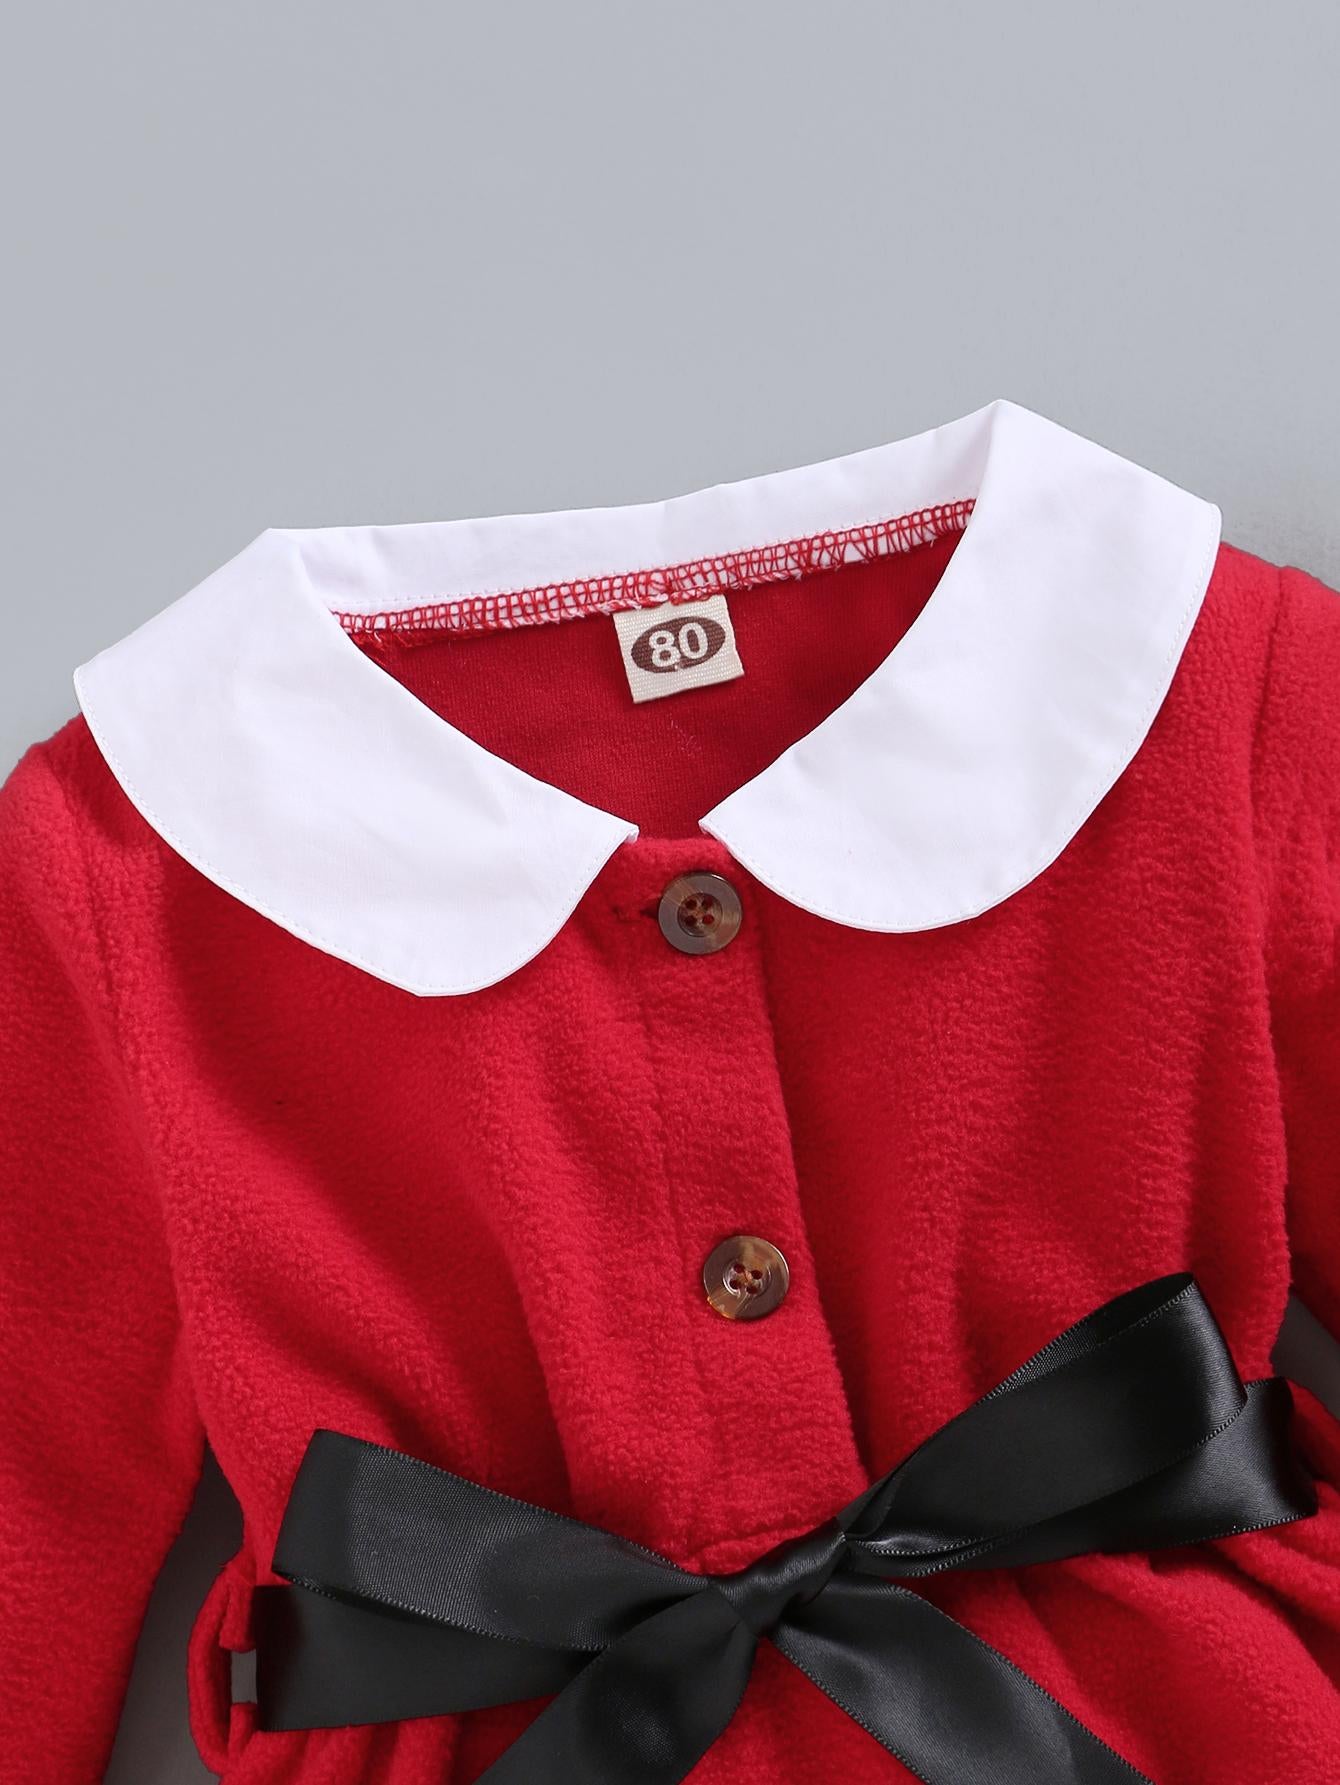 3-24M Kid fashion Girls Clothes Girl Christmas Red Long Sleeve Dress Red Catpapa L2008169